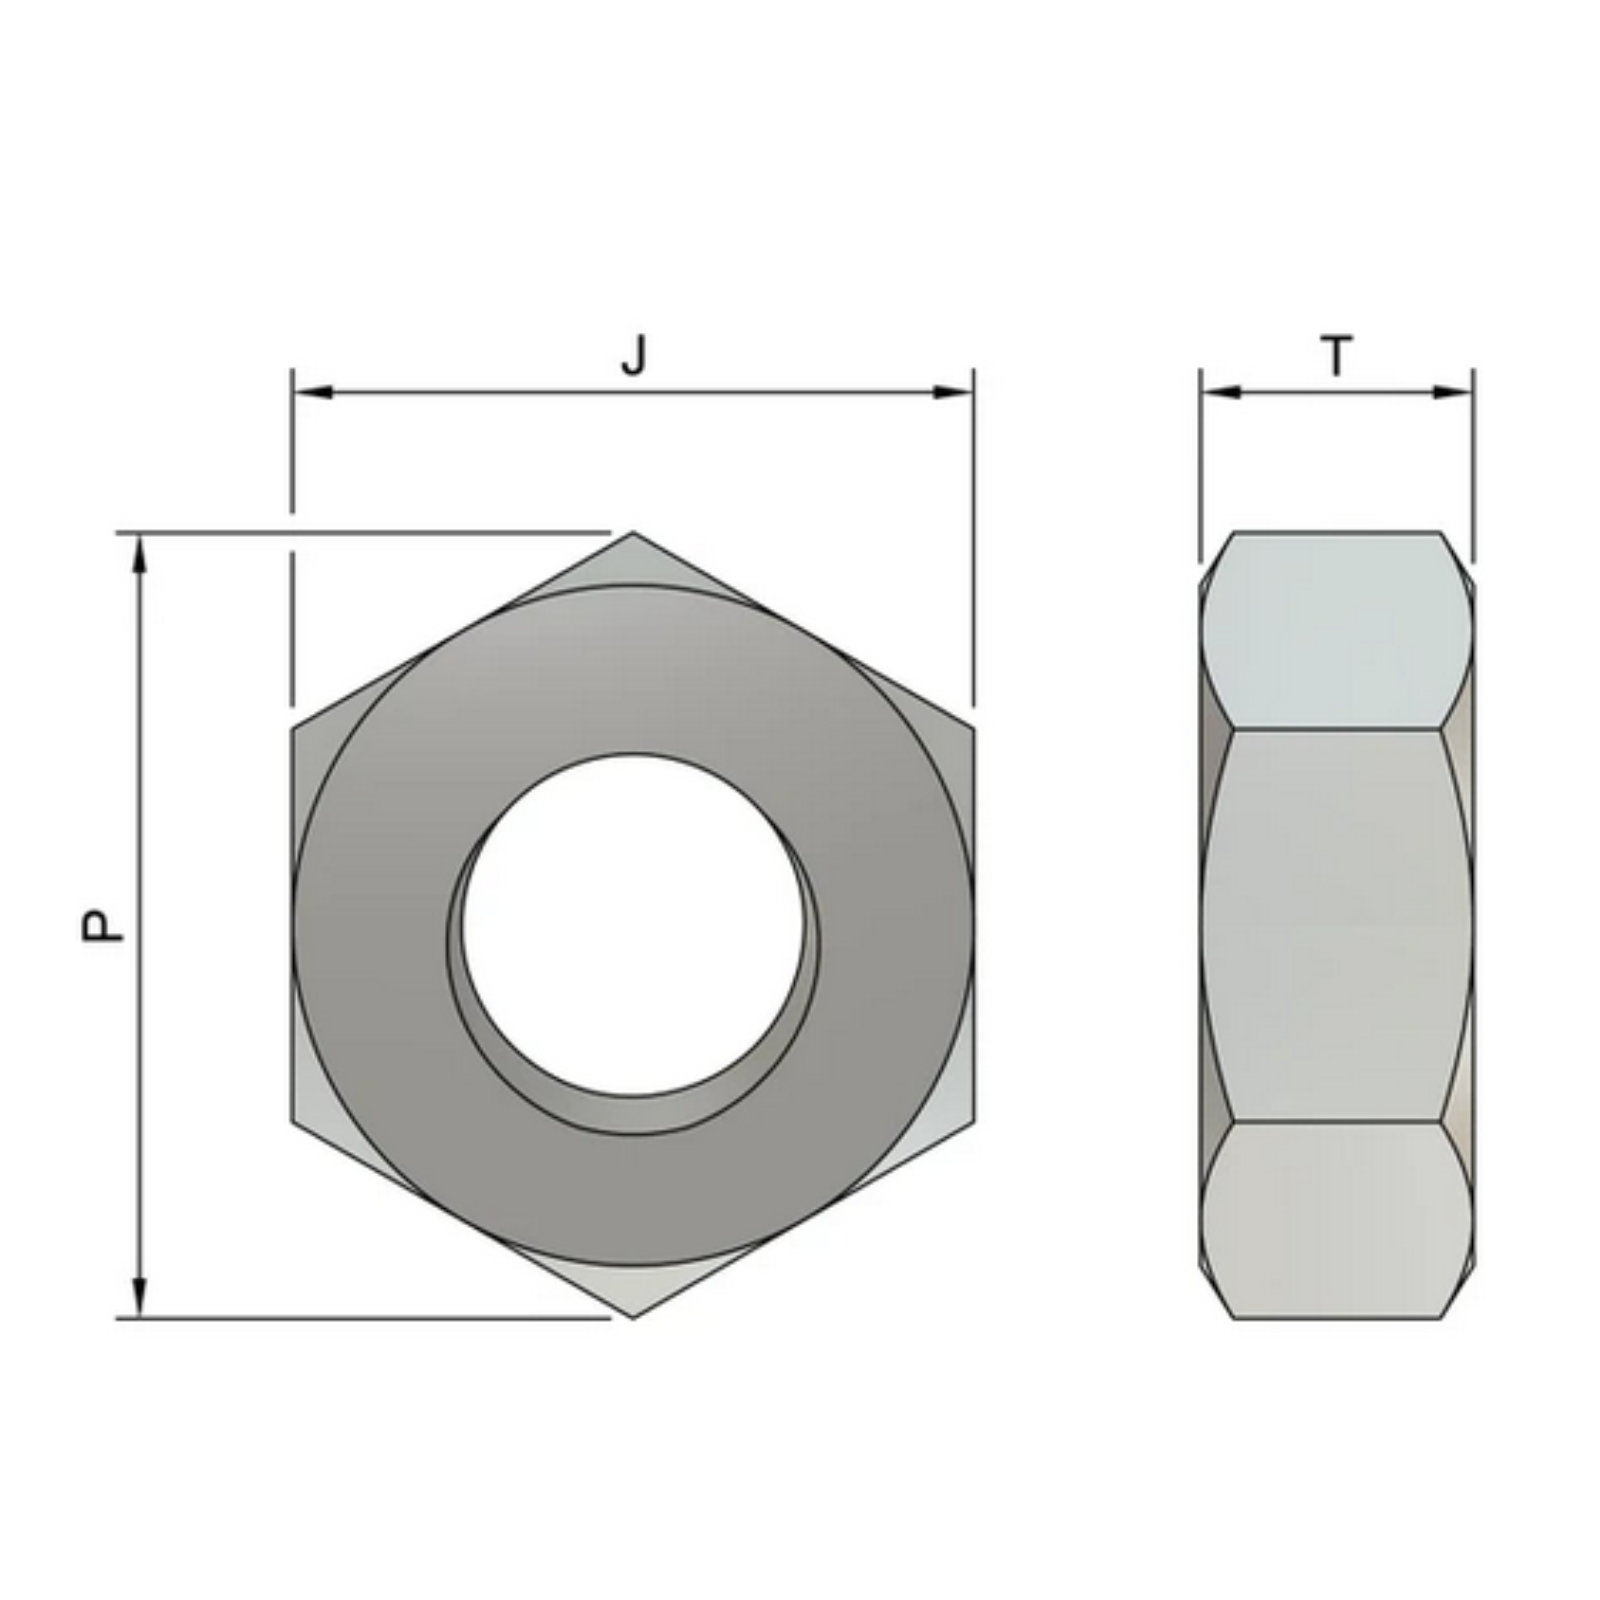 M7 Hexagon Nuts (DIN 934) - Stainless Steel (A4)